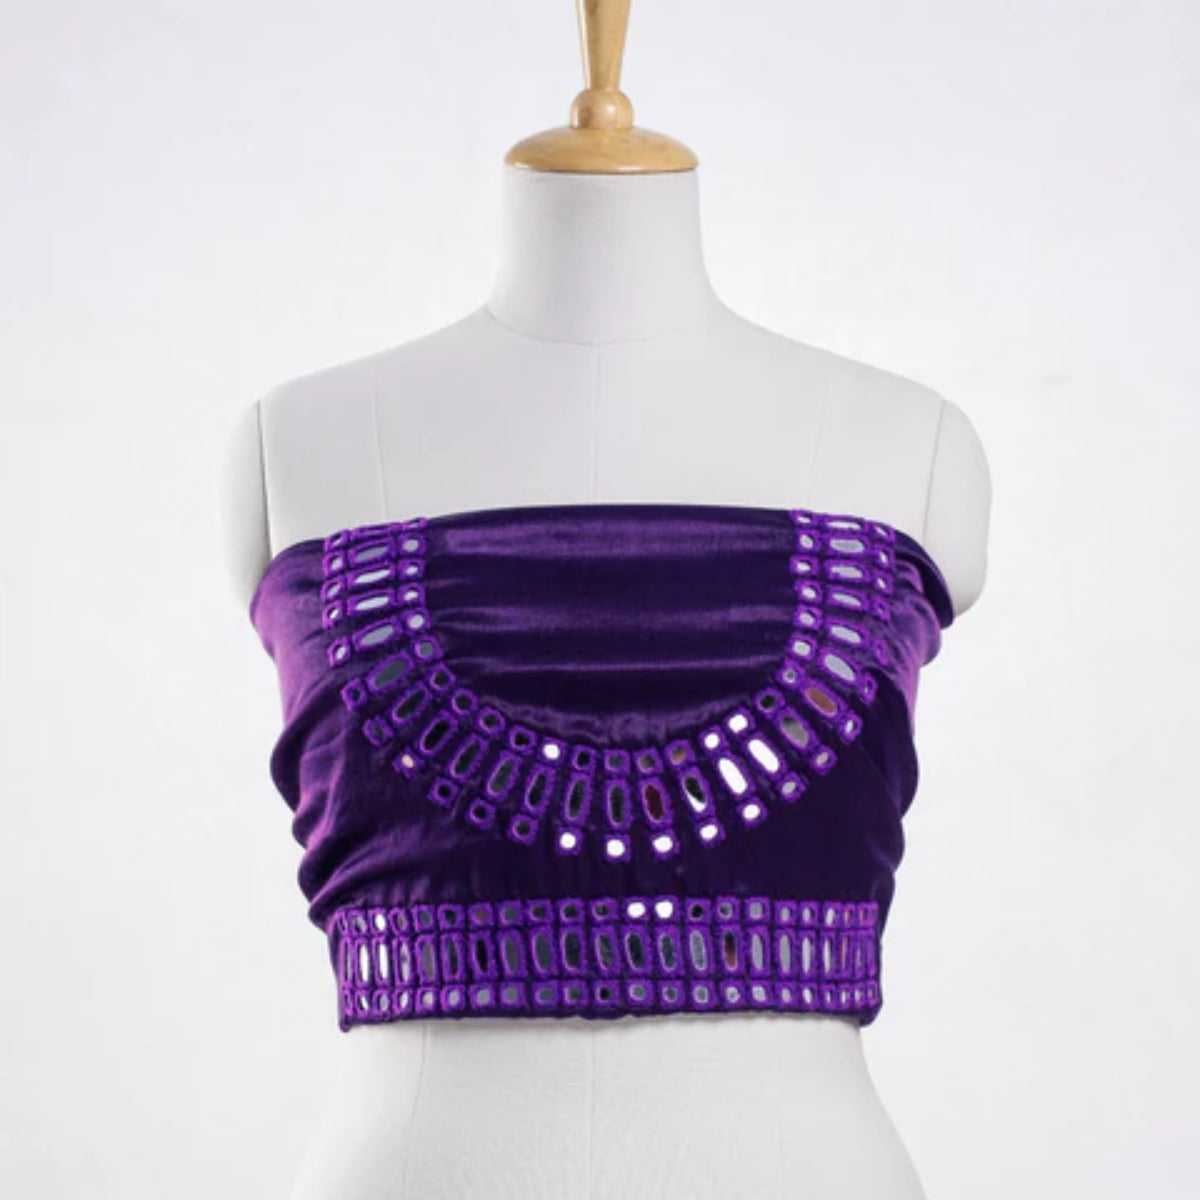 Black And Golden Canvas Tribal Belly Dance Belt at Rs 115/piece in